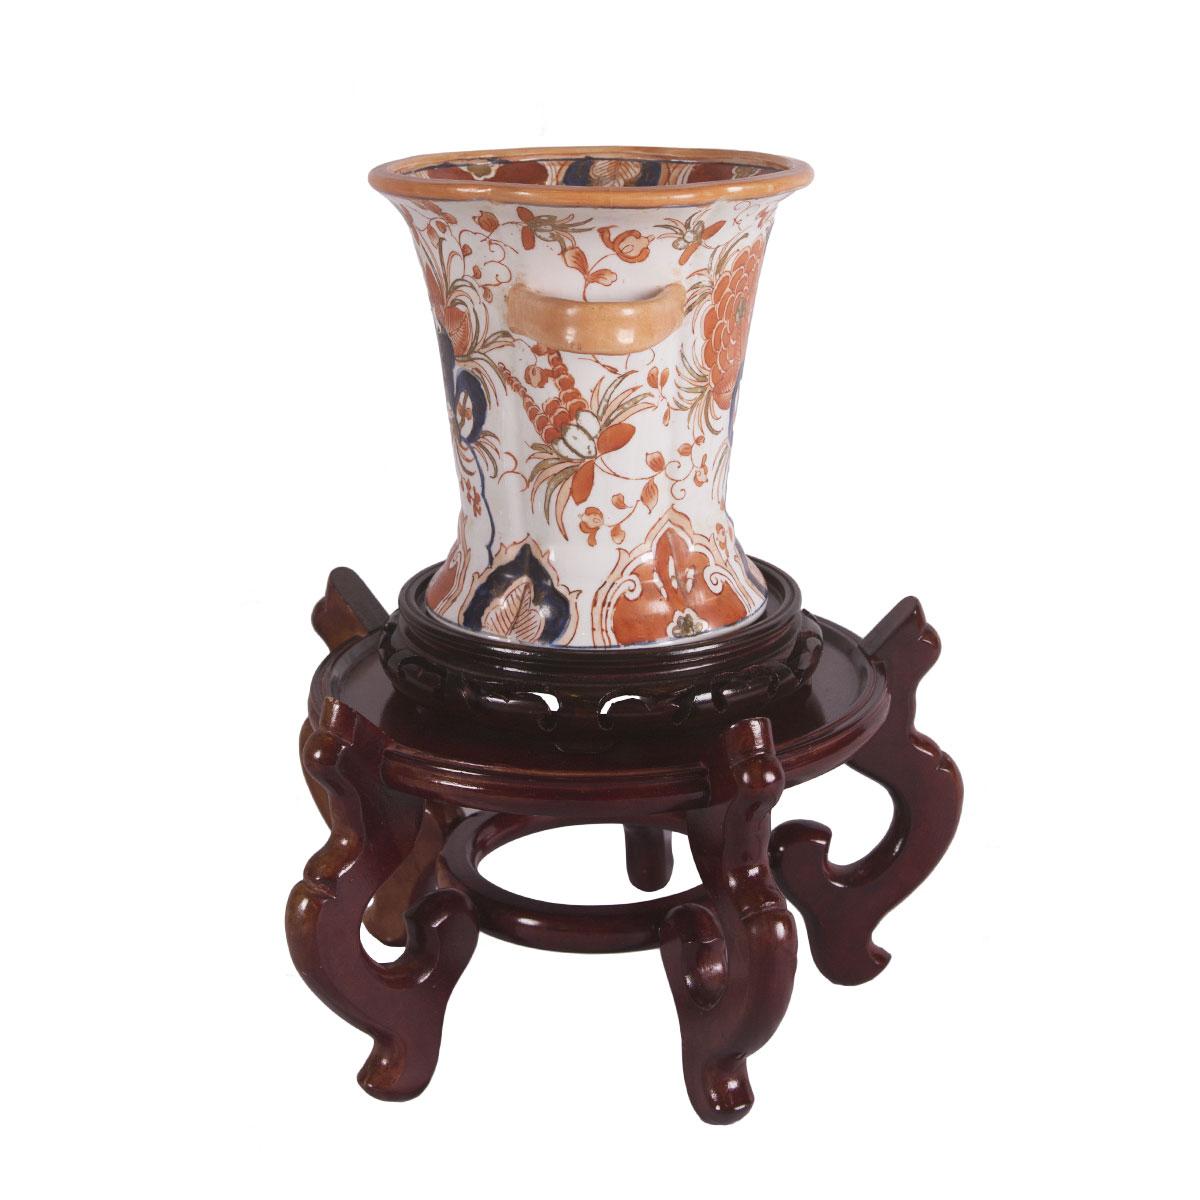 This Gump's hand painted vase with handles is made of porcelain and is inspired by 18th century Japanese potter. Includes both wooden stands as shown! Stands 15 inches tall on both stands and 8 inches tall on one stand. This vase is 10 inches in